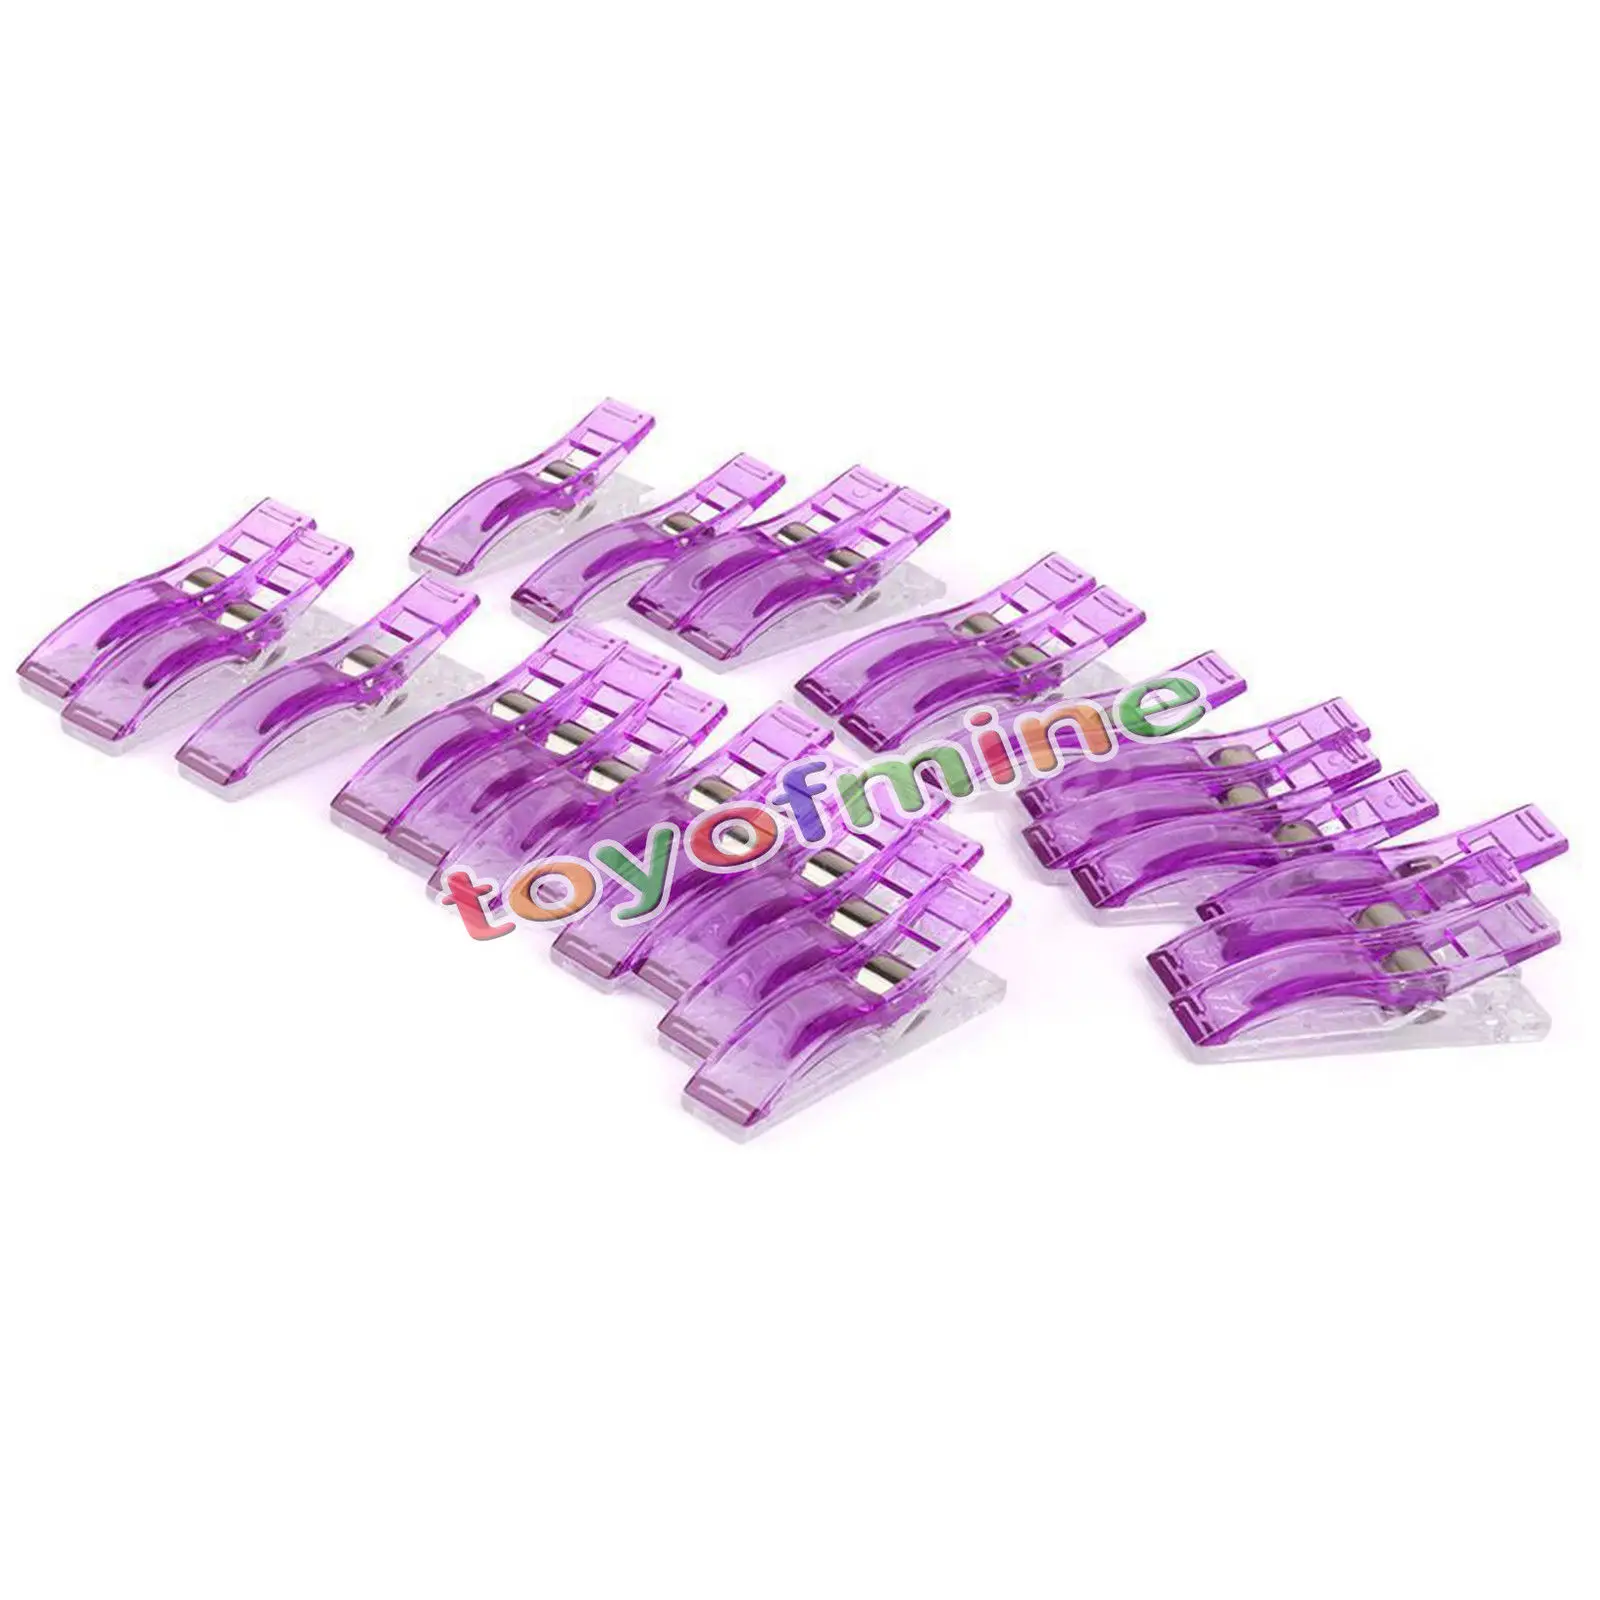 24 Jumbo Wonder Clips Fabric Clamps for Craft Sewing Quilting Binding PurpleYJn$ 